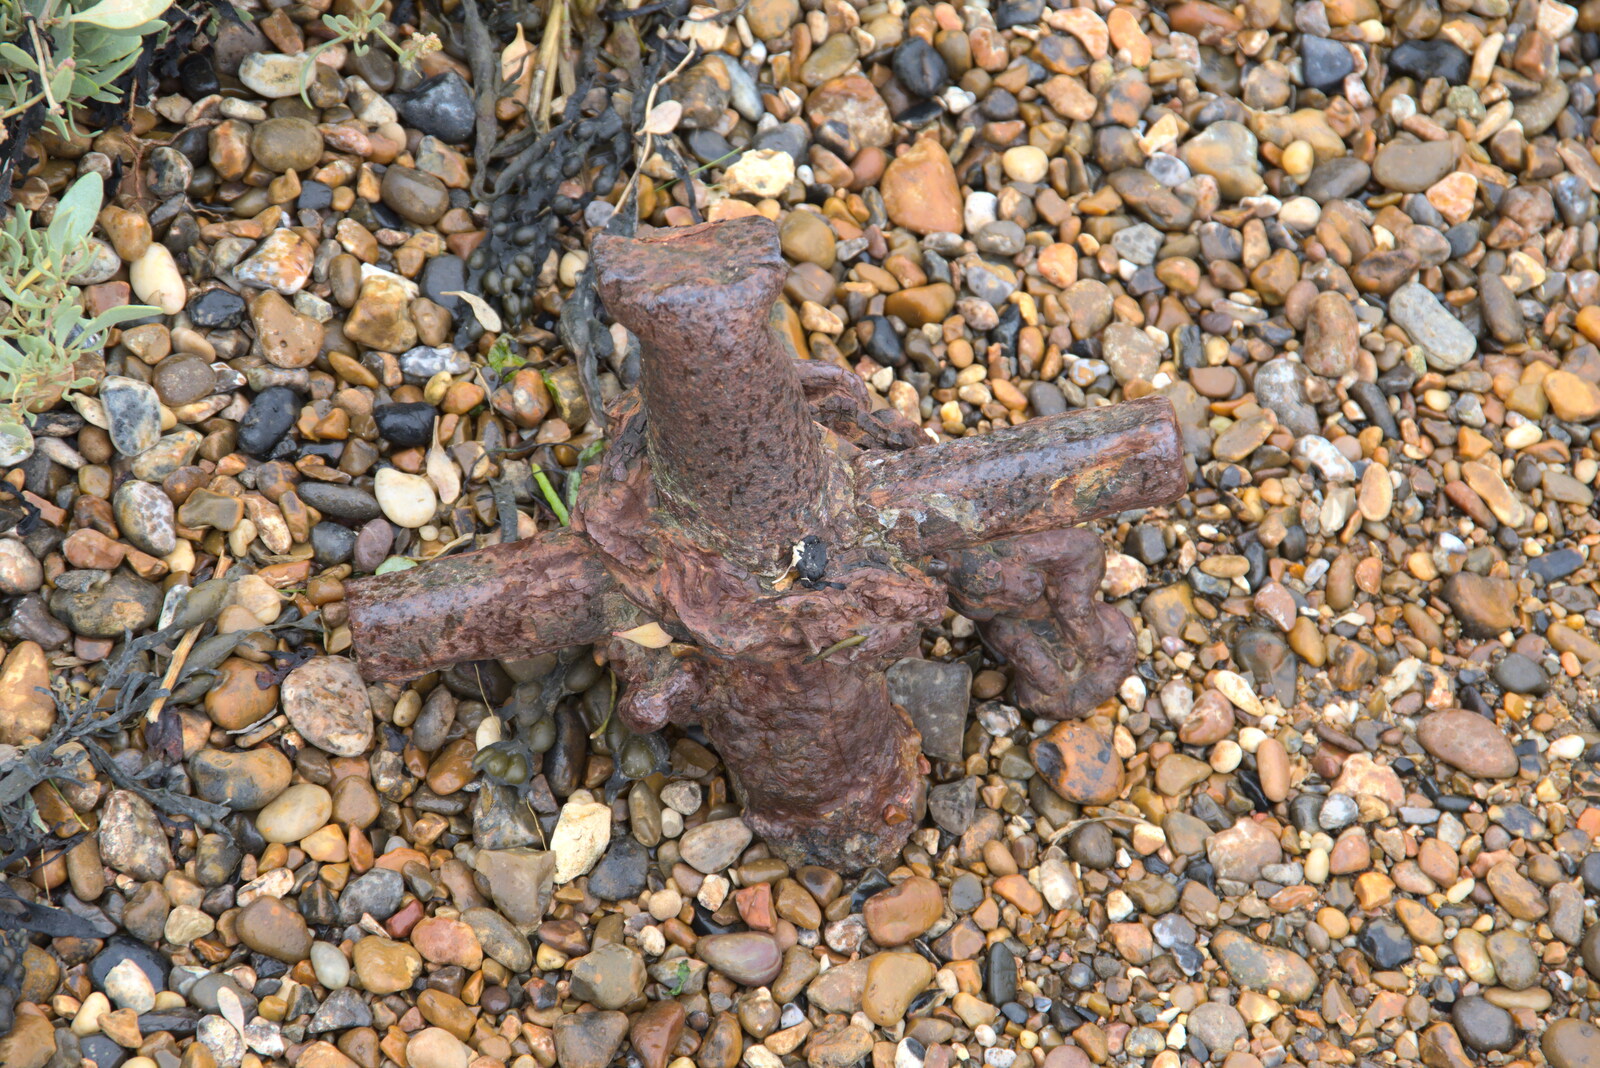 A lump of rusty iron from A Trip to Orford, Suffolk - 29th August 2020